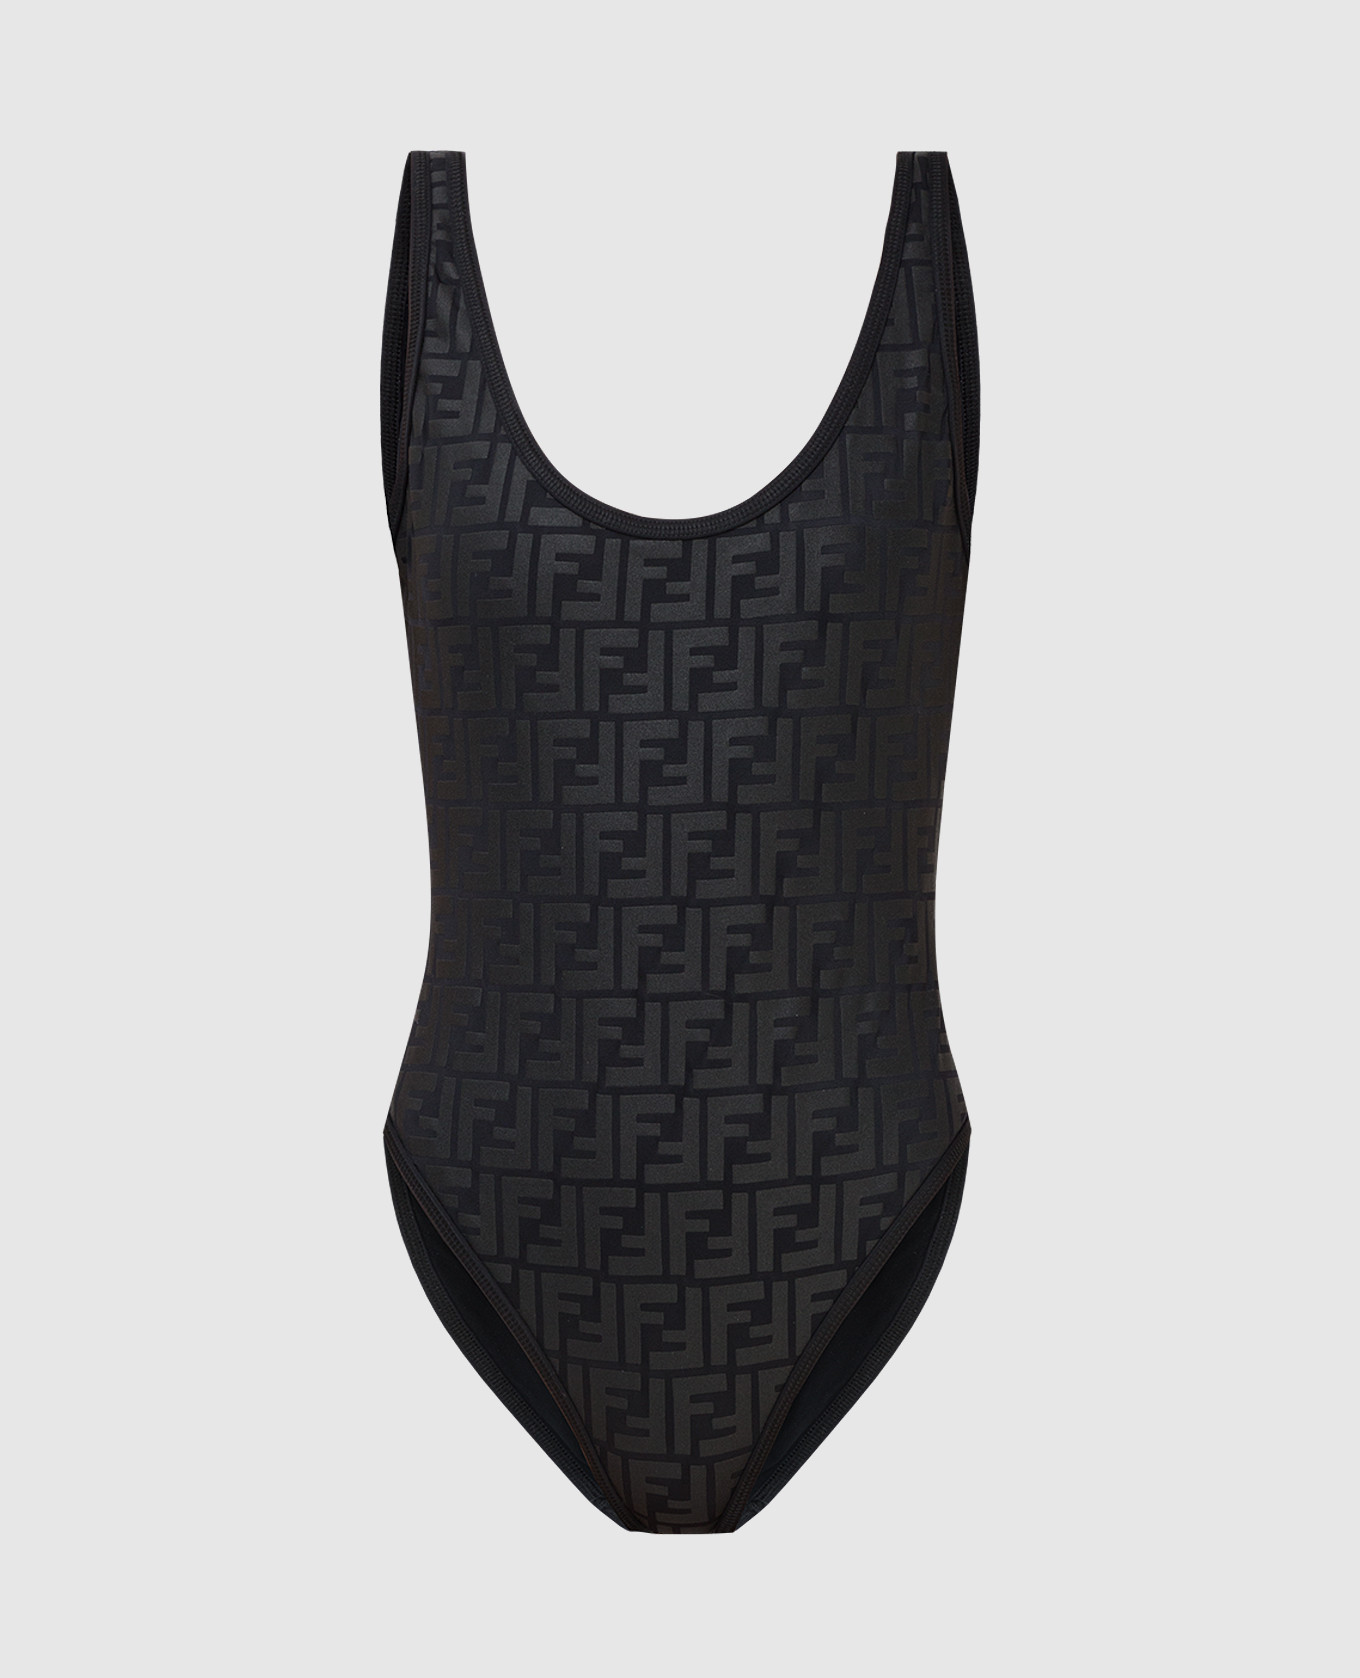 Black swimsuit with textured pattern "FF"